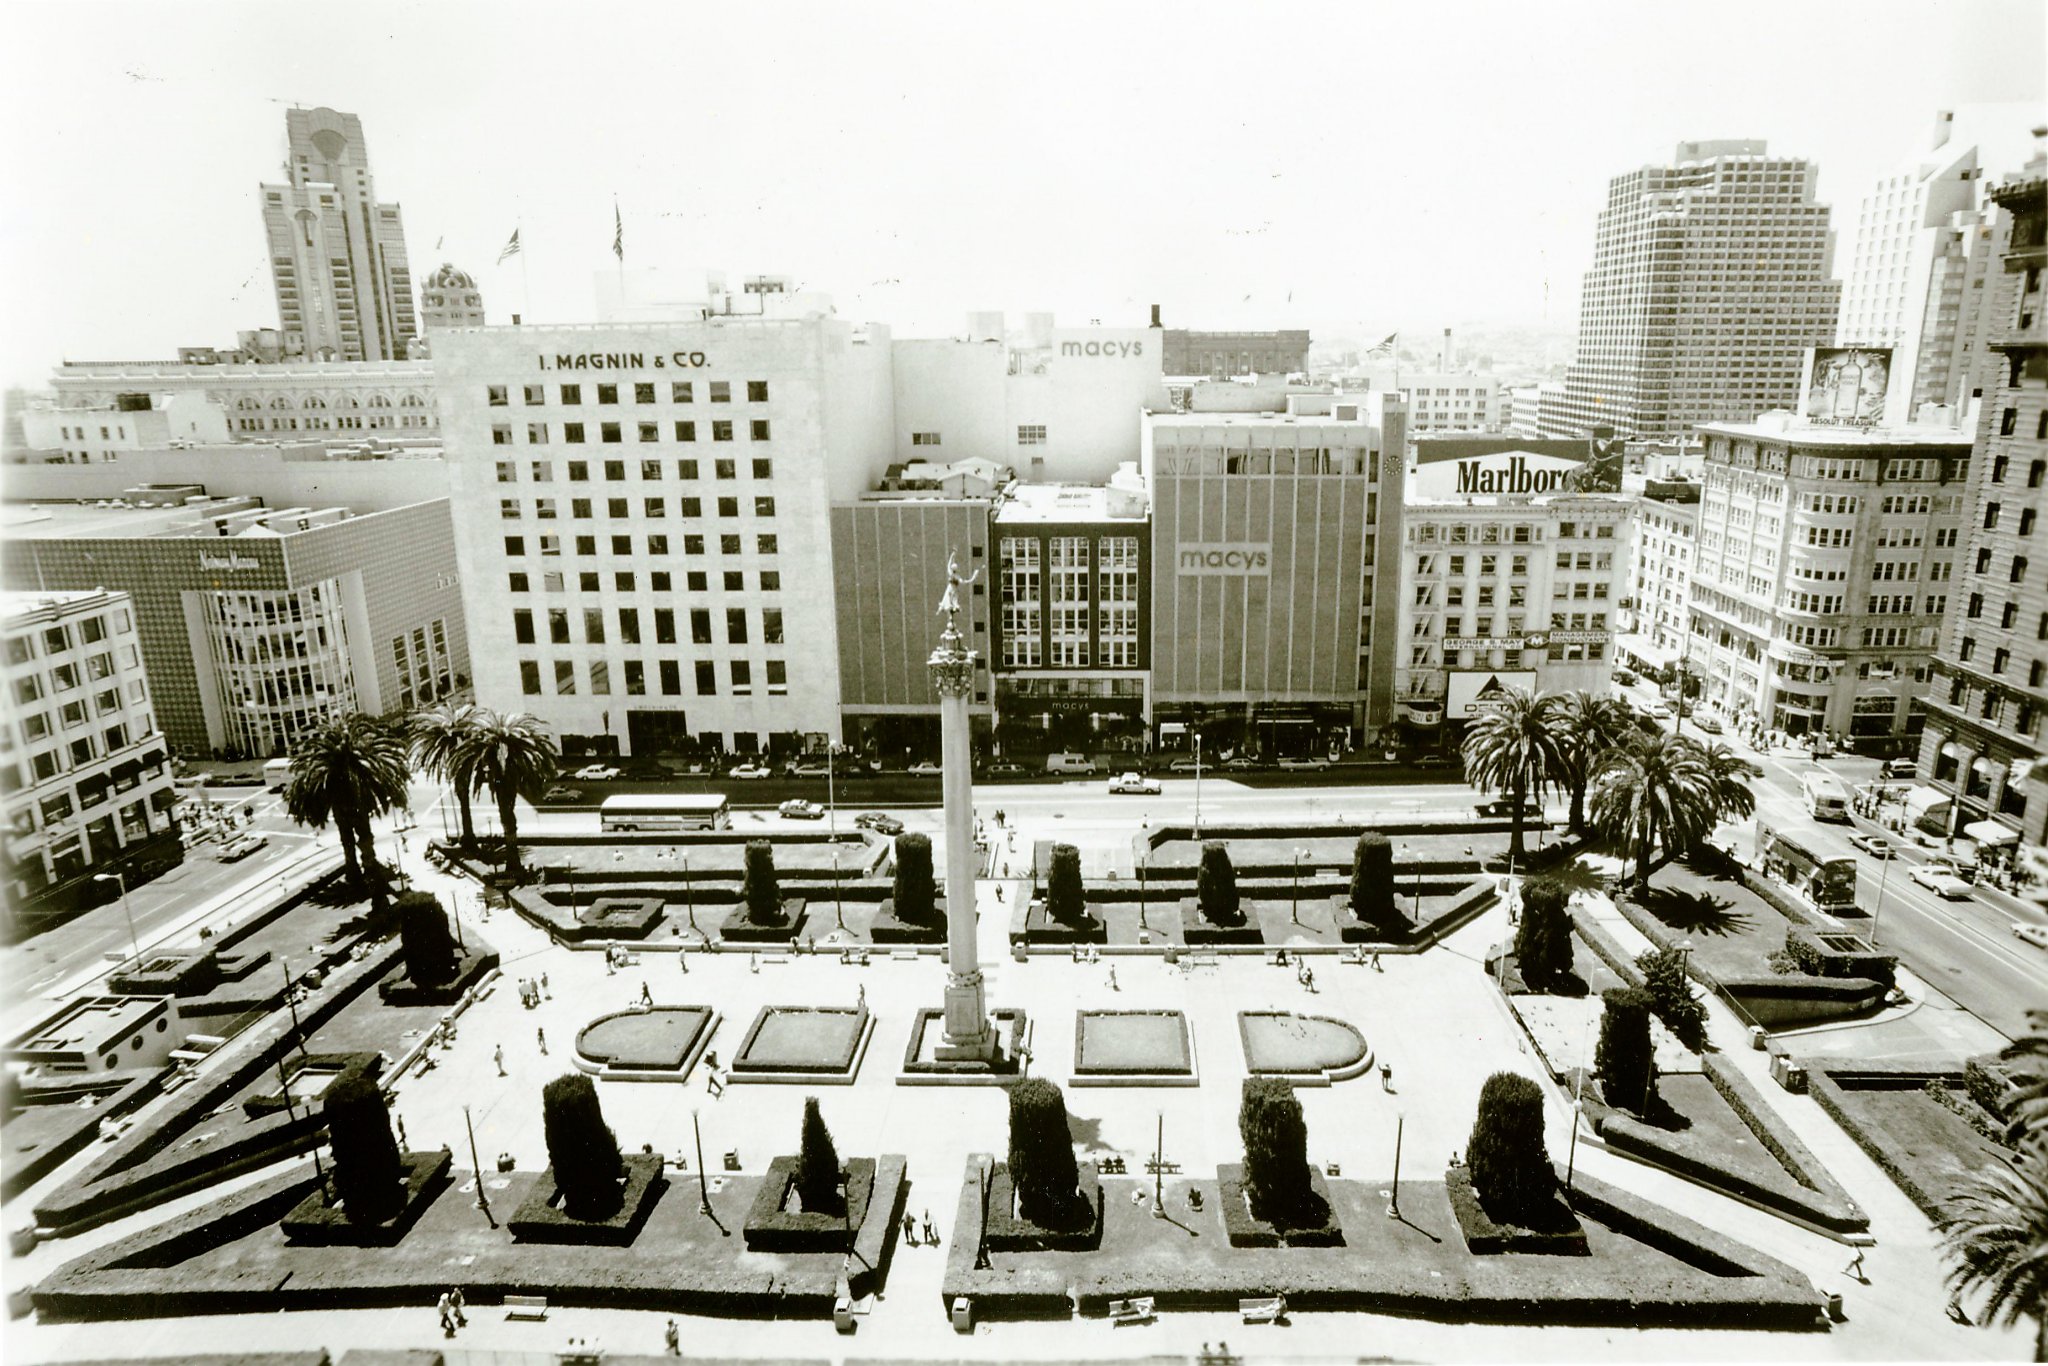 When a visit to SF's Union Square 'was a special treat